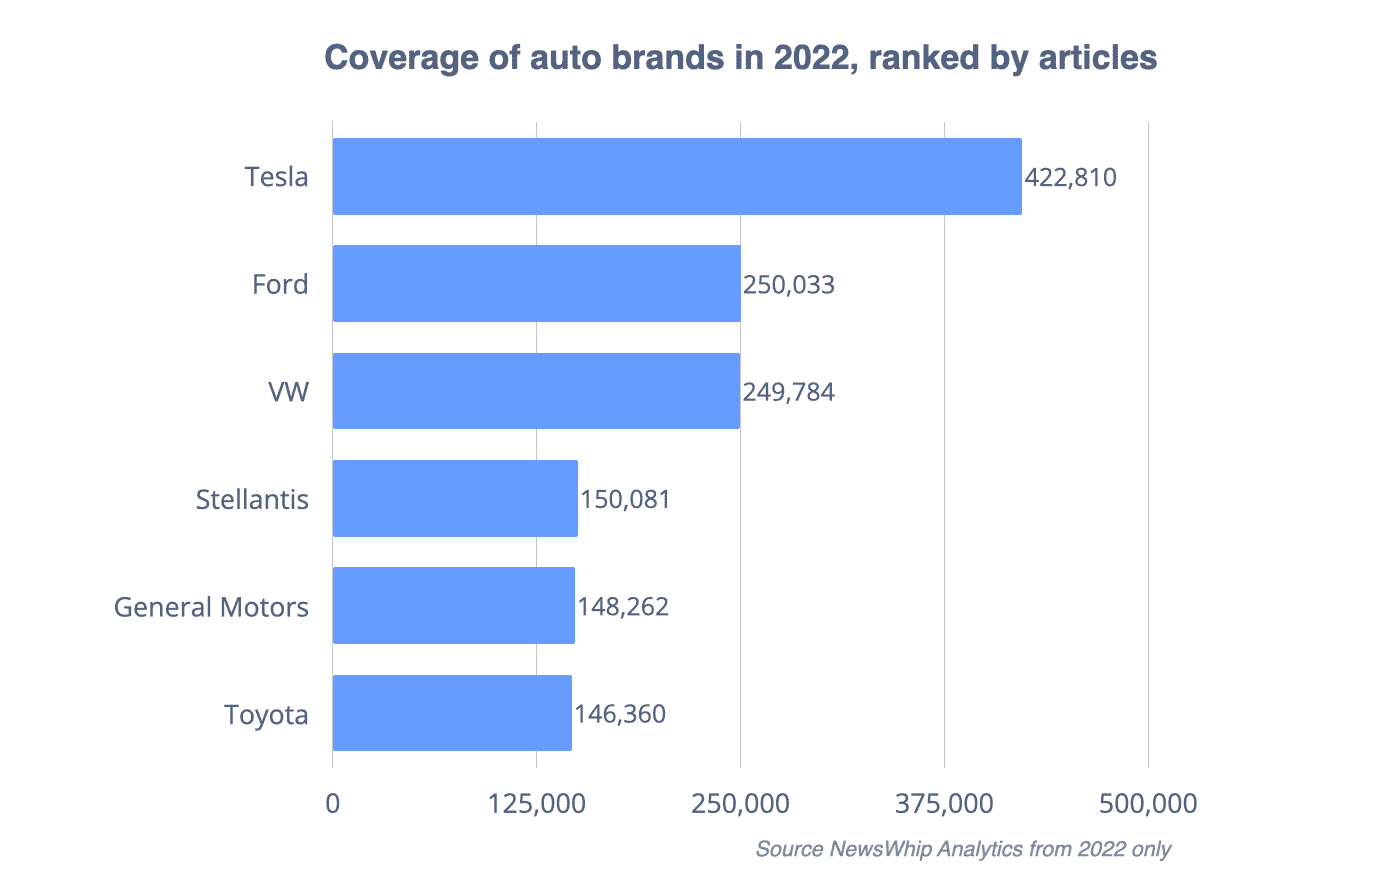 Chart showing six auto brands, ranked by number of articles in 2022, with Tesla at the top